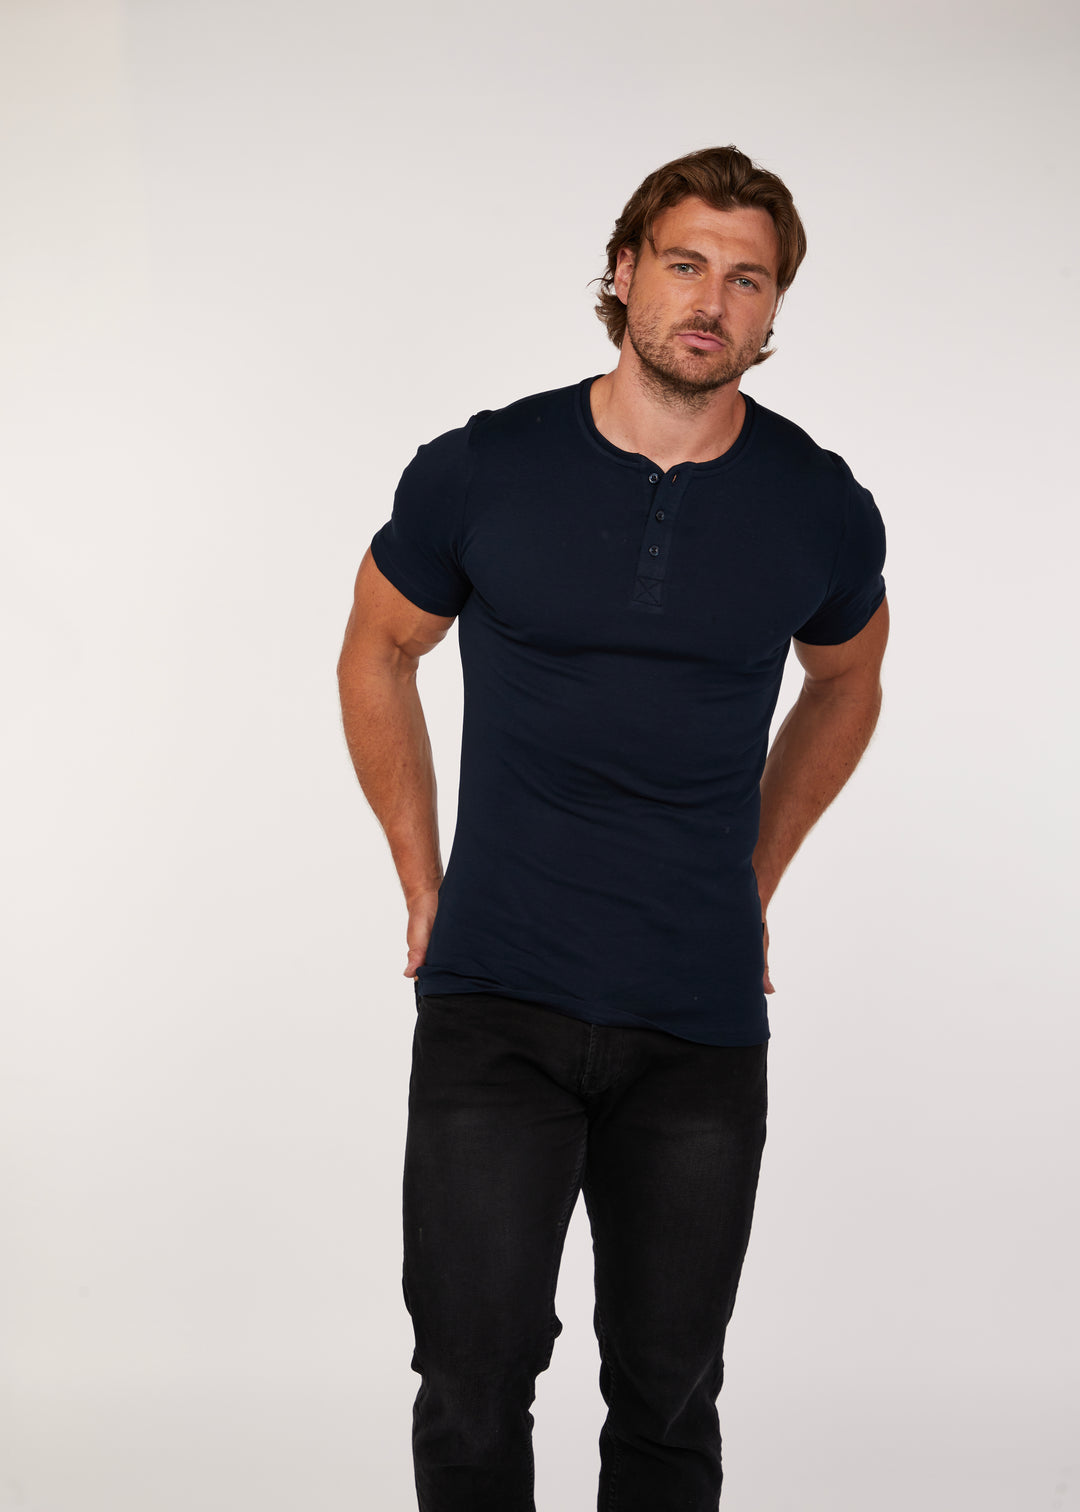 Mens Navy slim Fit Short Sleeve Henley. A Proportionally Fitted and Tapered Fit henley. The best henley for slim guys.